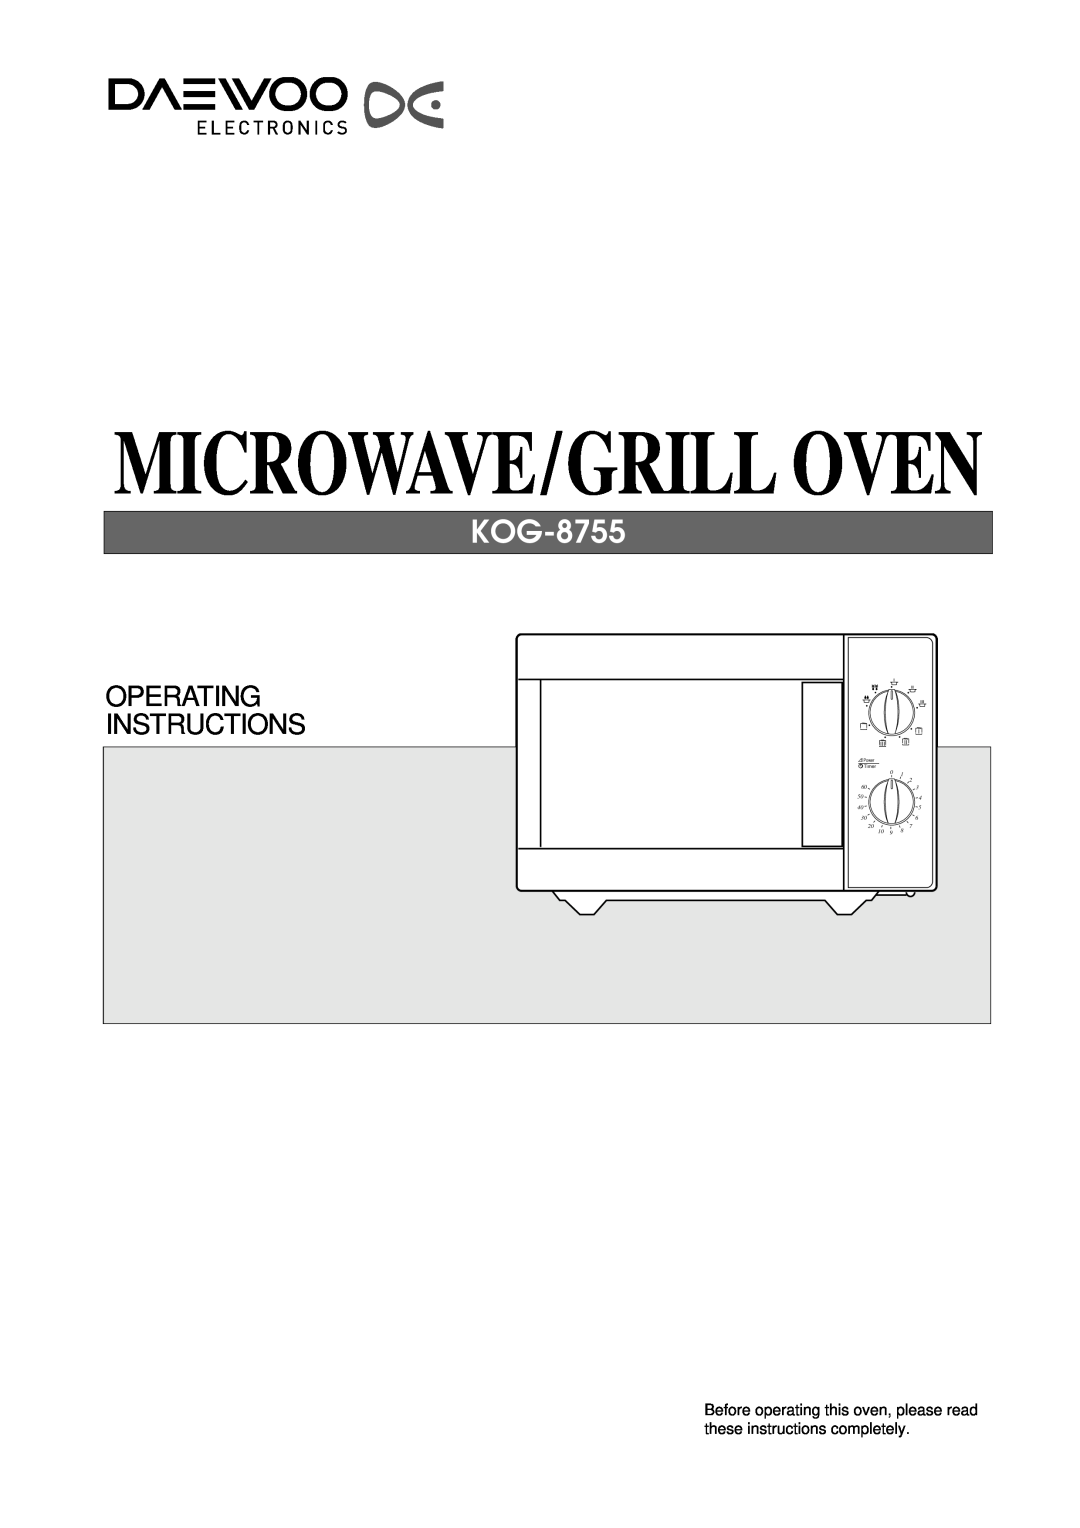 Daewoo KOG-8755 manual Microwave/Grill Oven, Operating Instructions, 306, Power Timer 